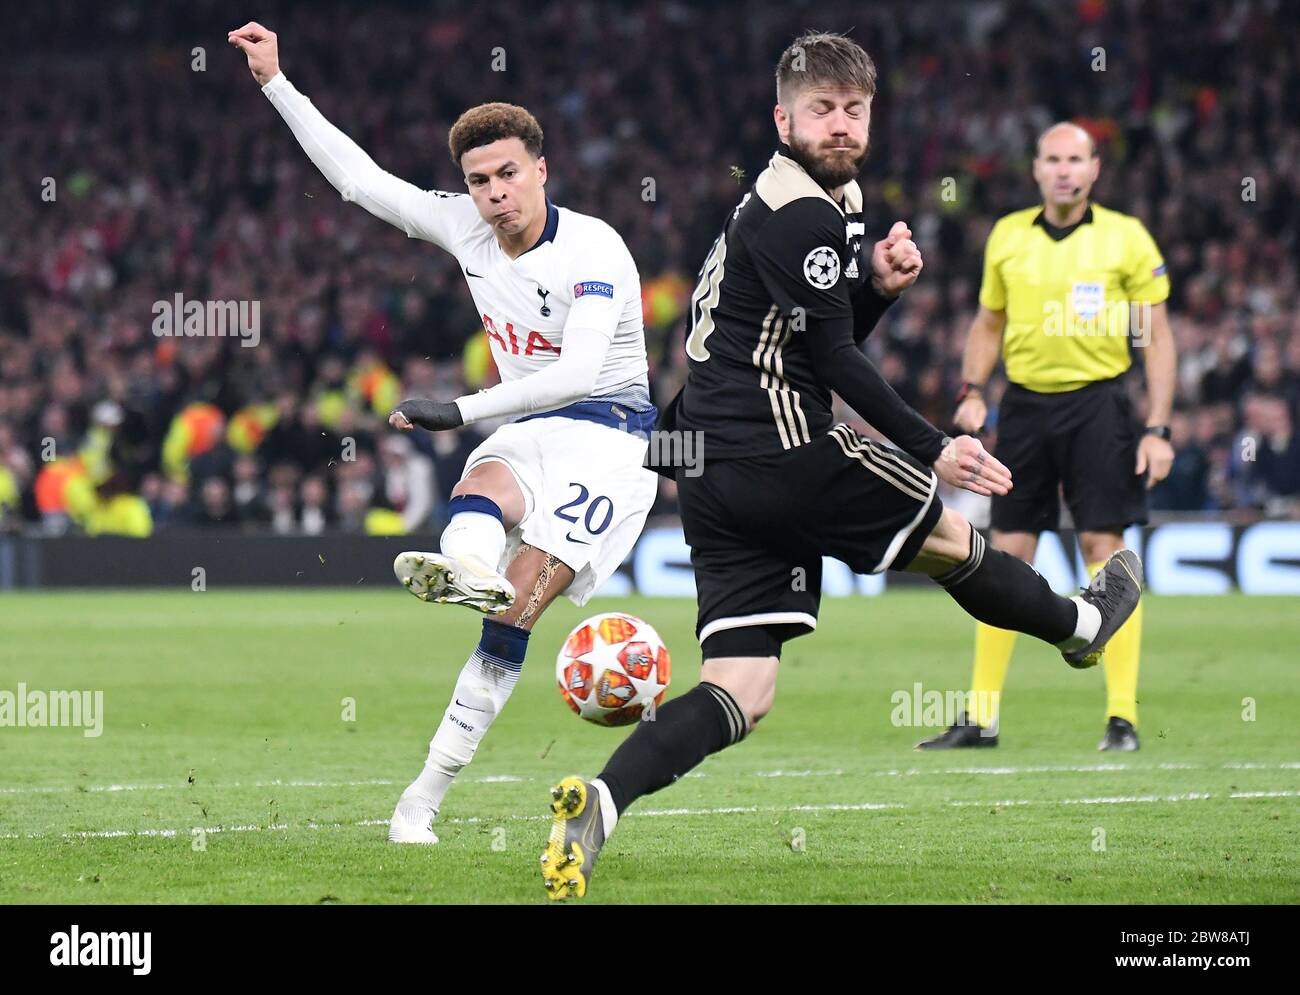 LONDON, ENGLAND - APRIL 30, 2019: Dele Alli of Tottenham (L) and Lasse Schone of Ajax (R) pictured during the first leg of the 2018/19 UEFA Champions League Semi-finals game between Tottenham Hotspur (England) and AFC Ajax (Netherlands) at Tottenham Hotspur Stadium. Stock Photo